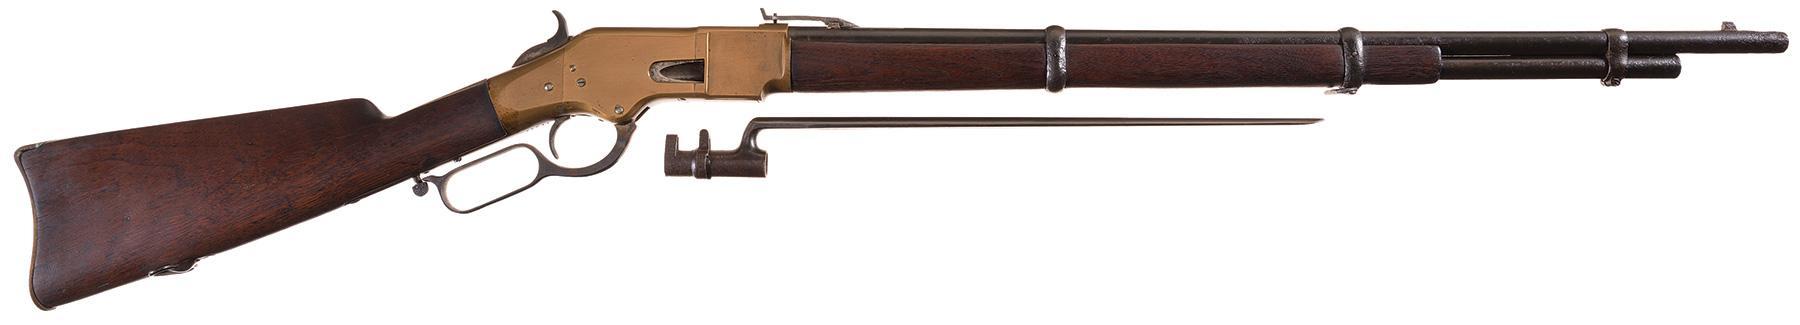 Winchester Model 1866 Lever Action Musket with Bayonet